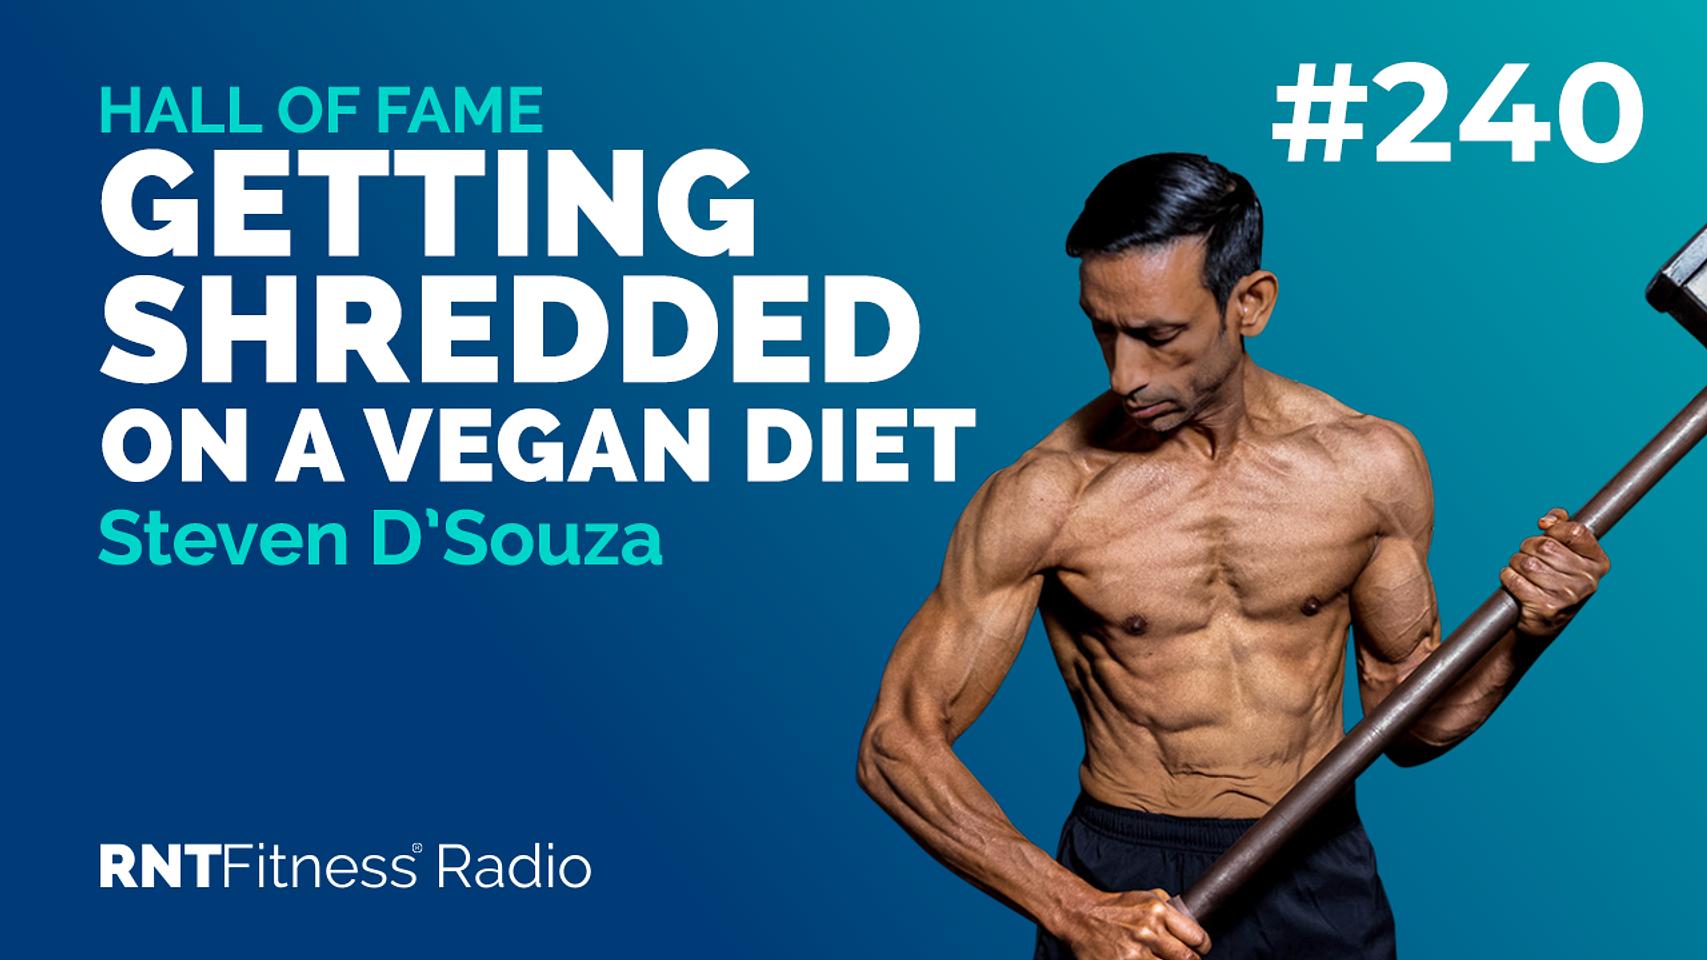 Ep. 240 Hall of Fame | Steven D’Souza - Getting Shredded On A Vegan Diet Whilst Authoring His 5th Book